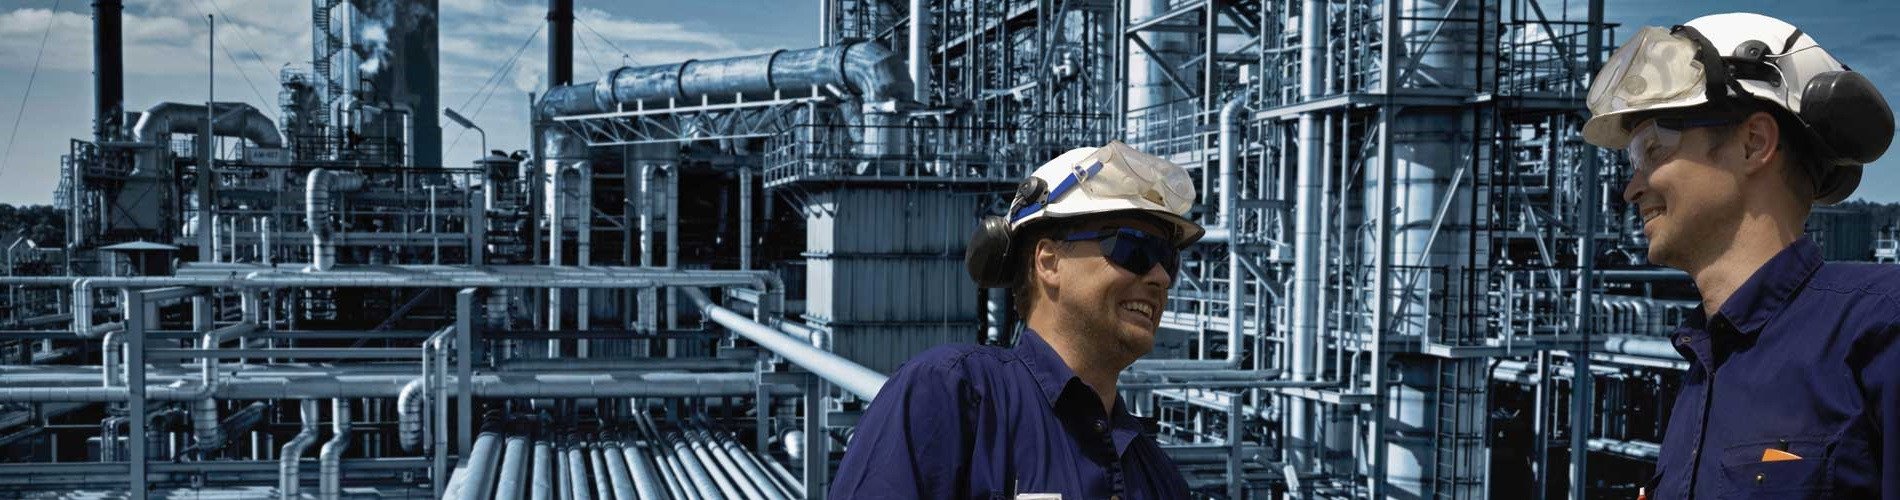 Trade Assistants Mining FIFO Fitters Maintenance QLD-iMINCO.net Mining Information